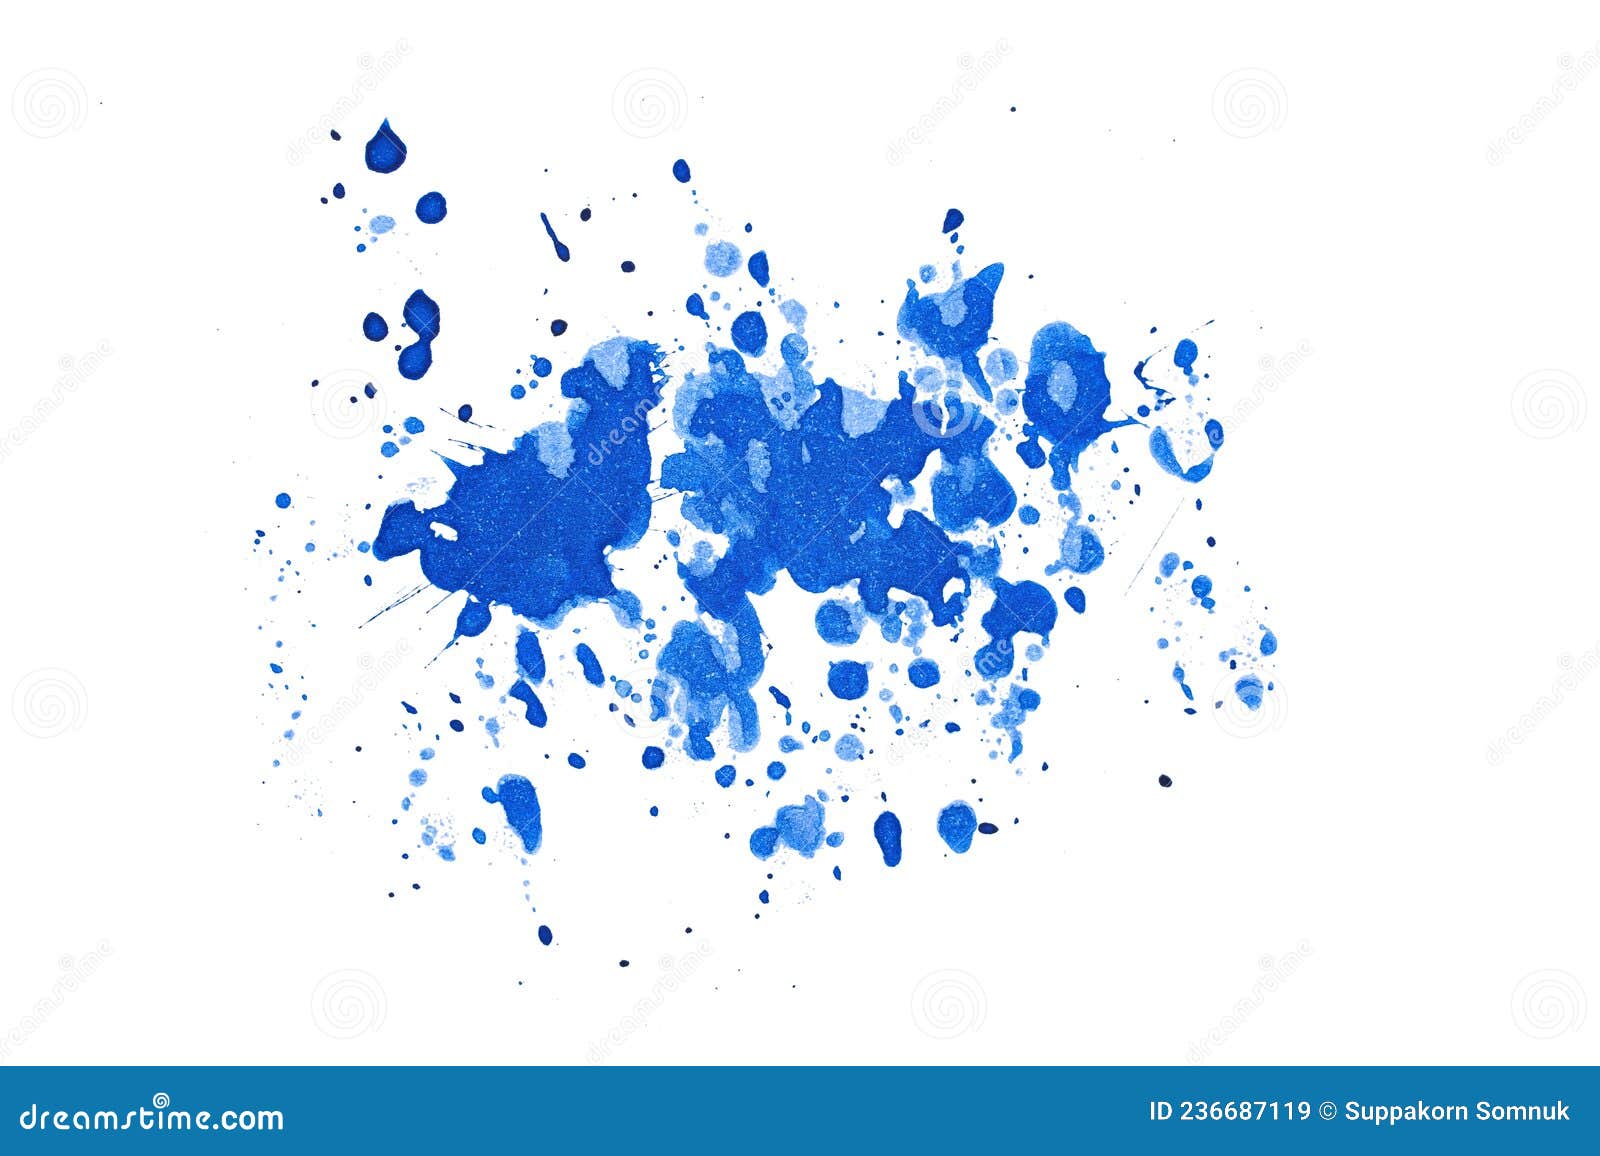 Blue Abstract Watercolor Paint Brush Stroke Texture Isolated on White ...